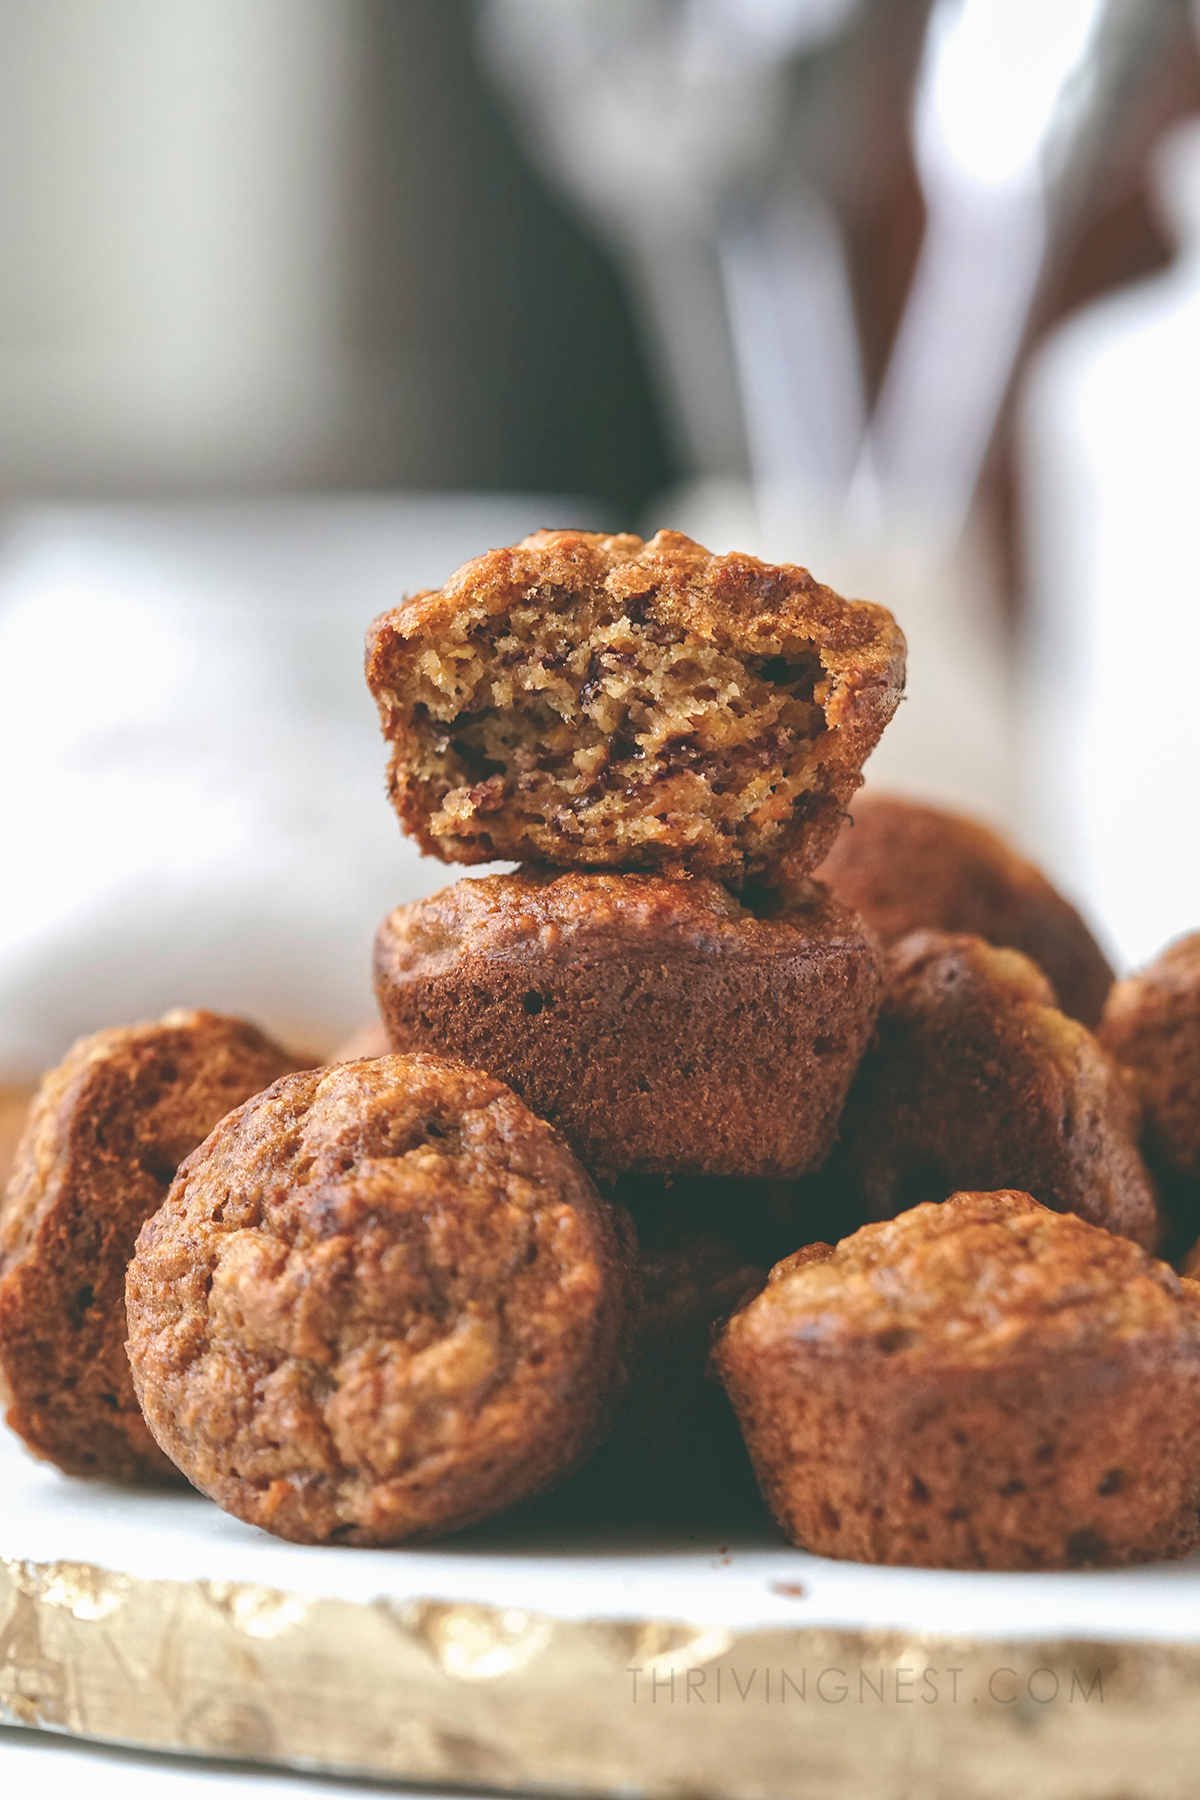 Banana carrot muffins for babies toddlers and older kids.